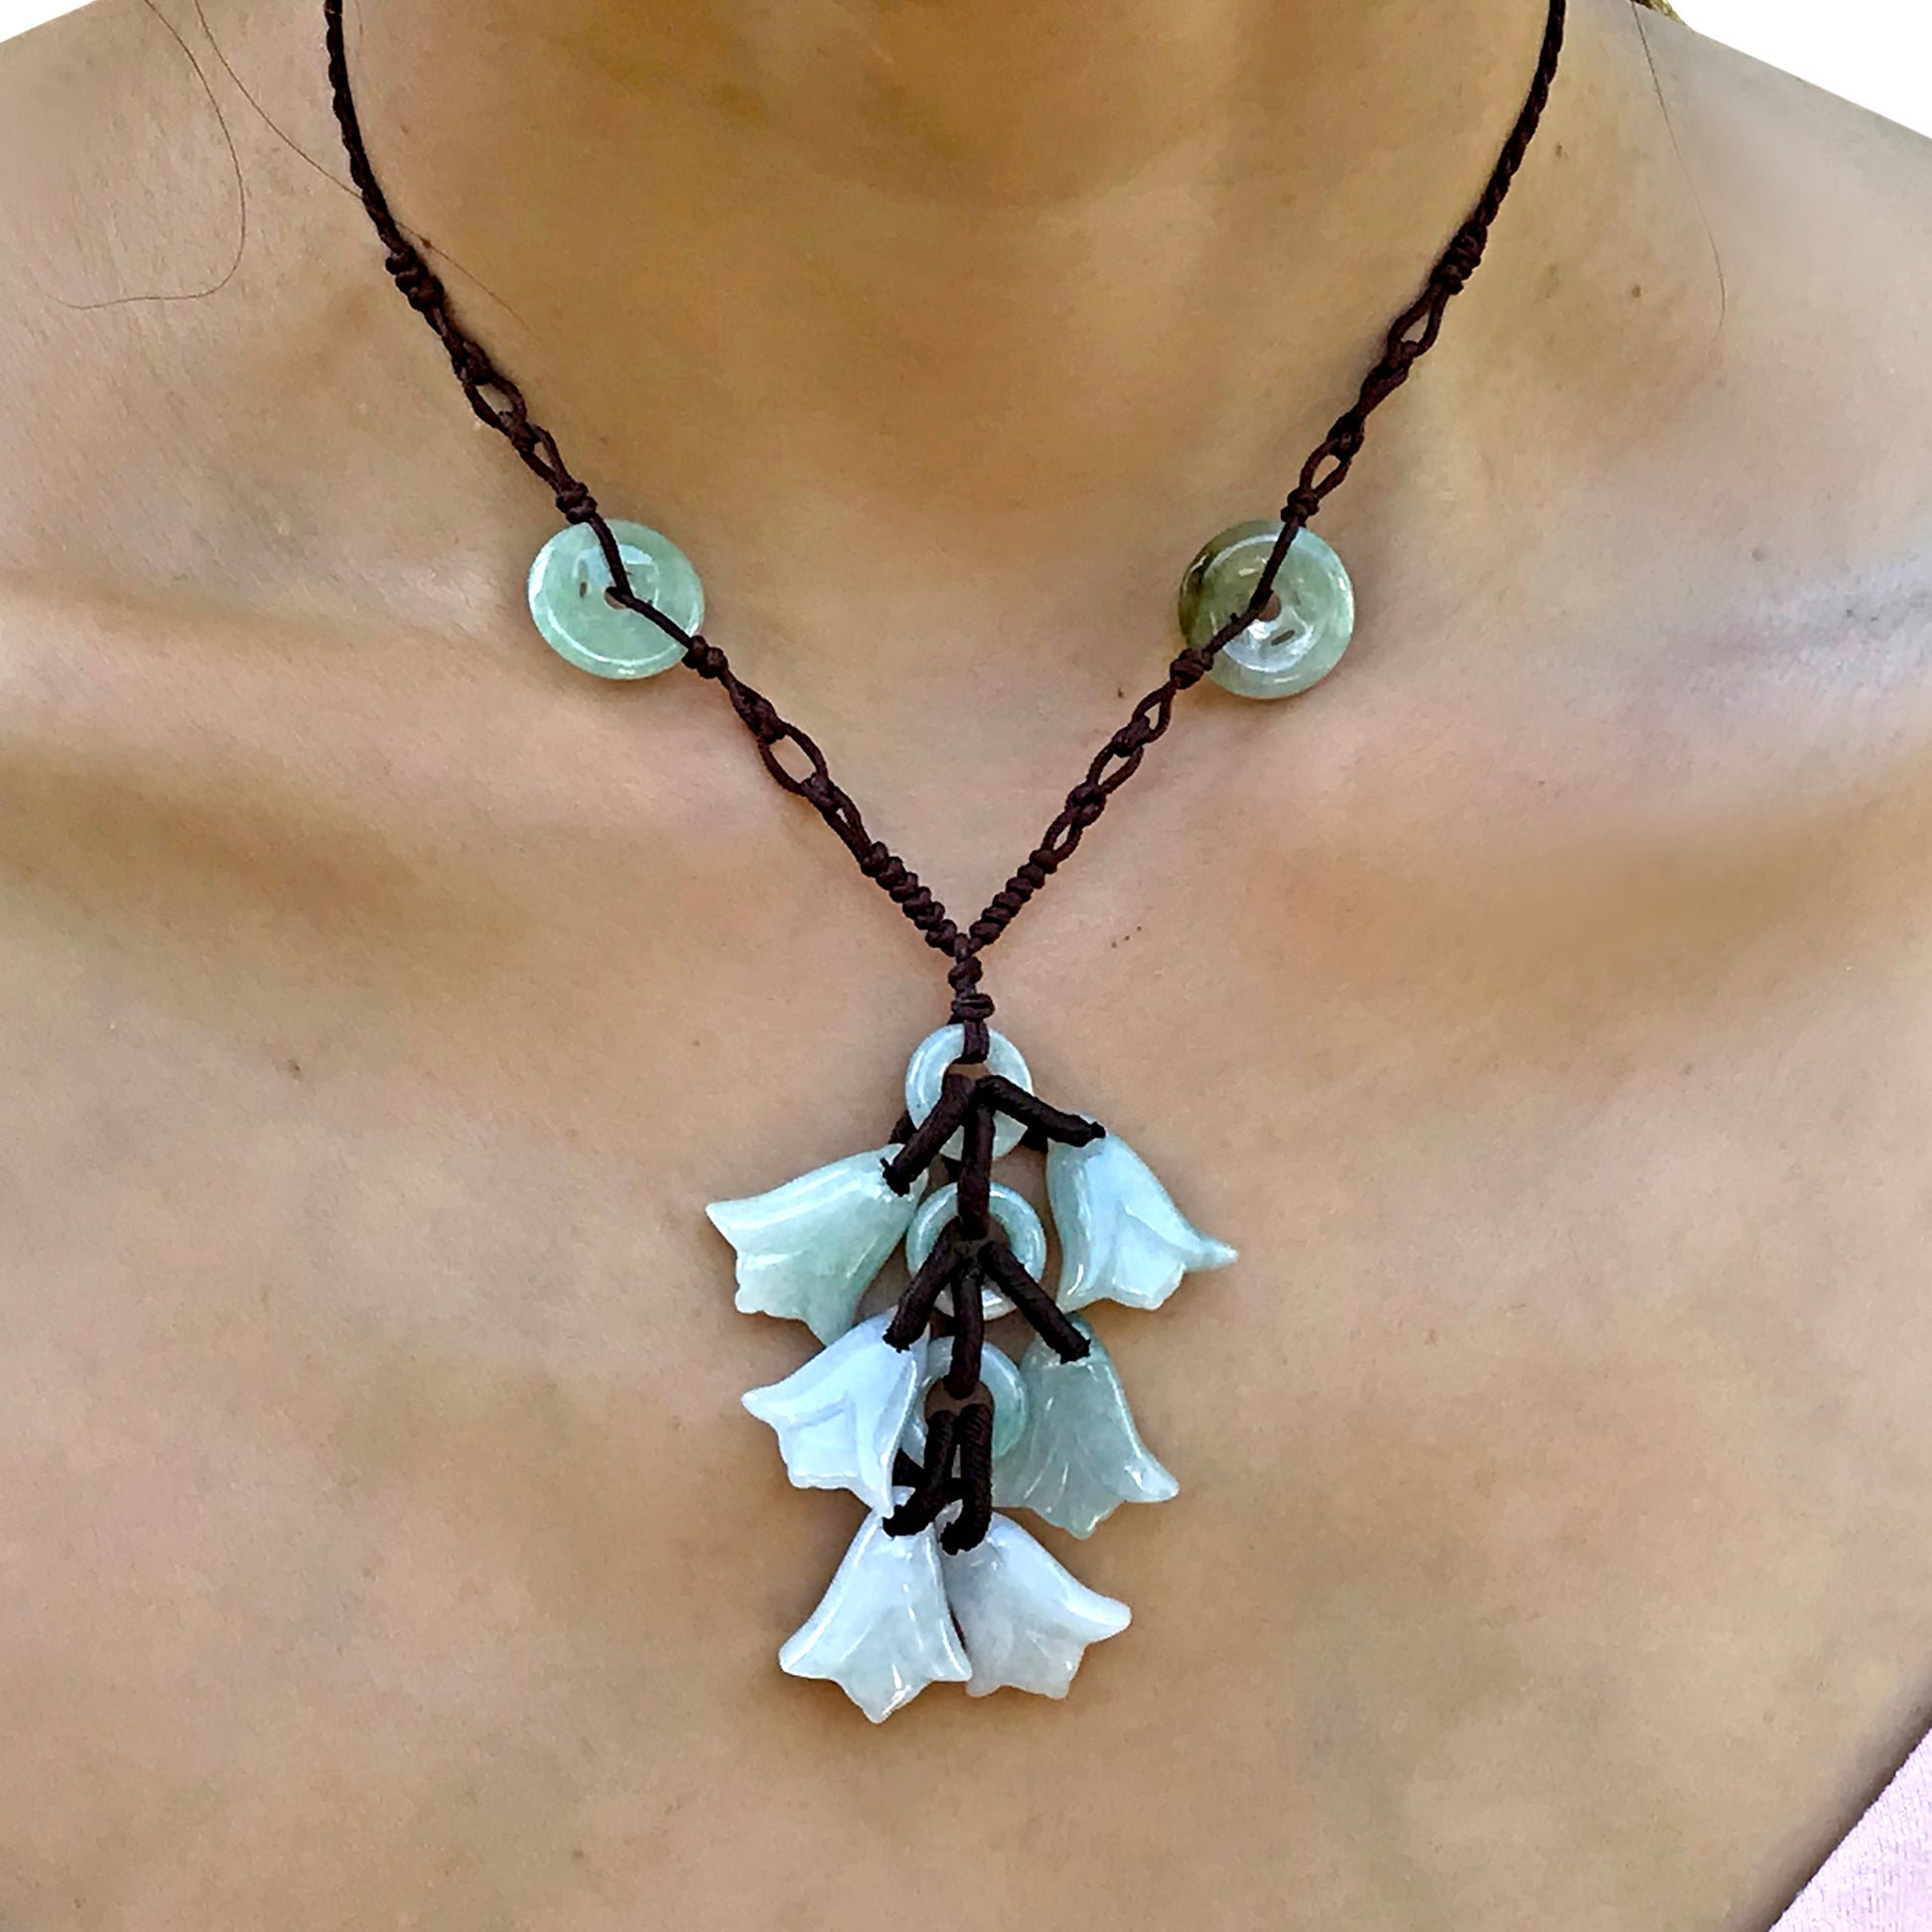 Beautiful and Dainty Bellflower Dangles Handmade Jade Necklace Pendant with Brown Cord